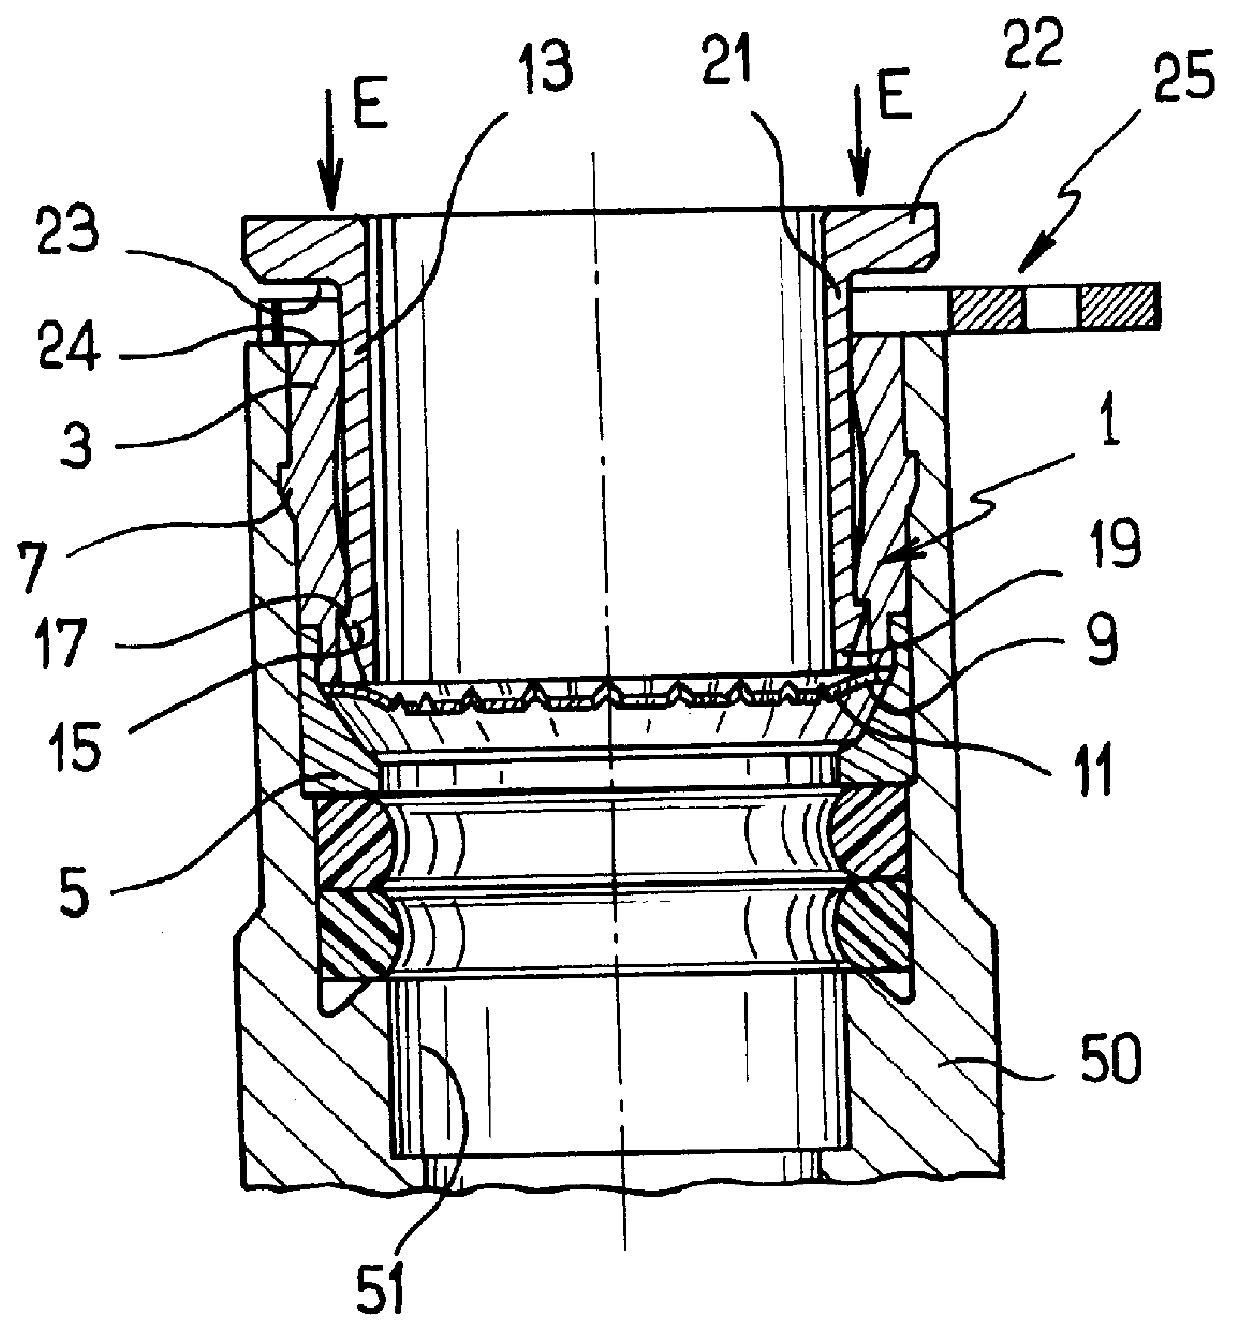 Device for fast connection of a tube to a rigid element with anti-extraction ring and safety seal